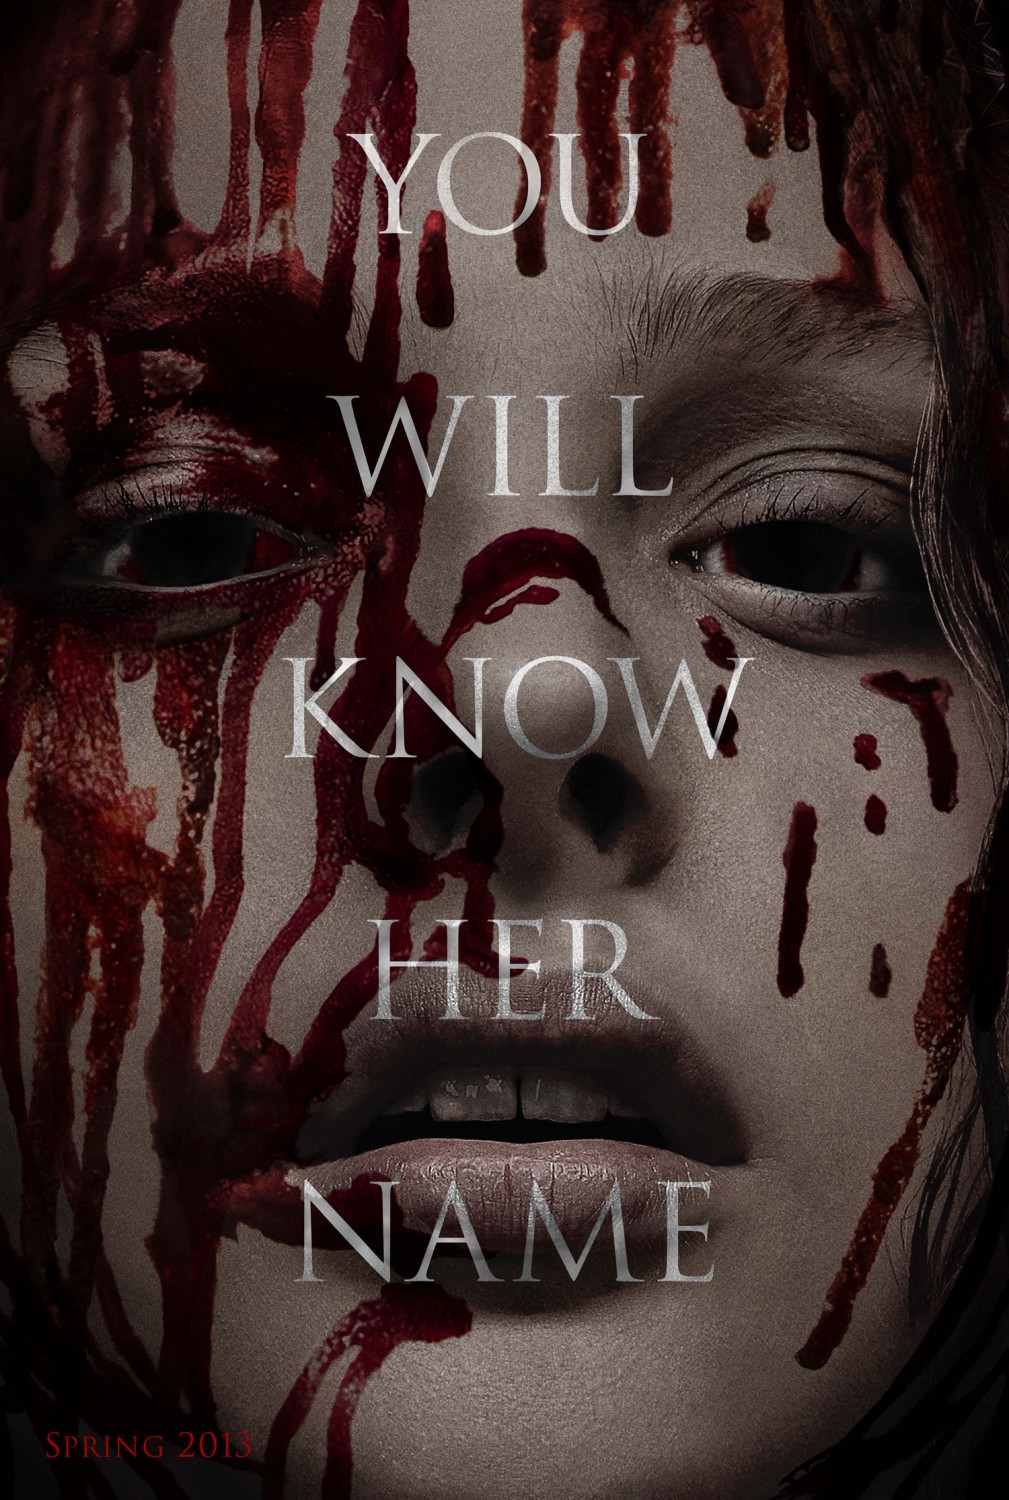 carrie remake movie poster